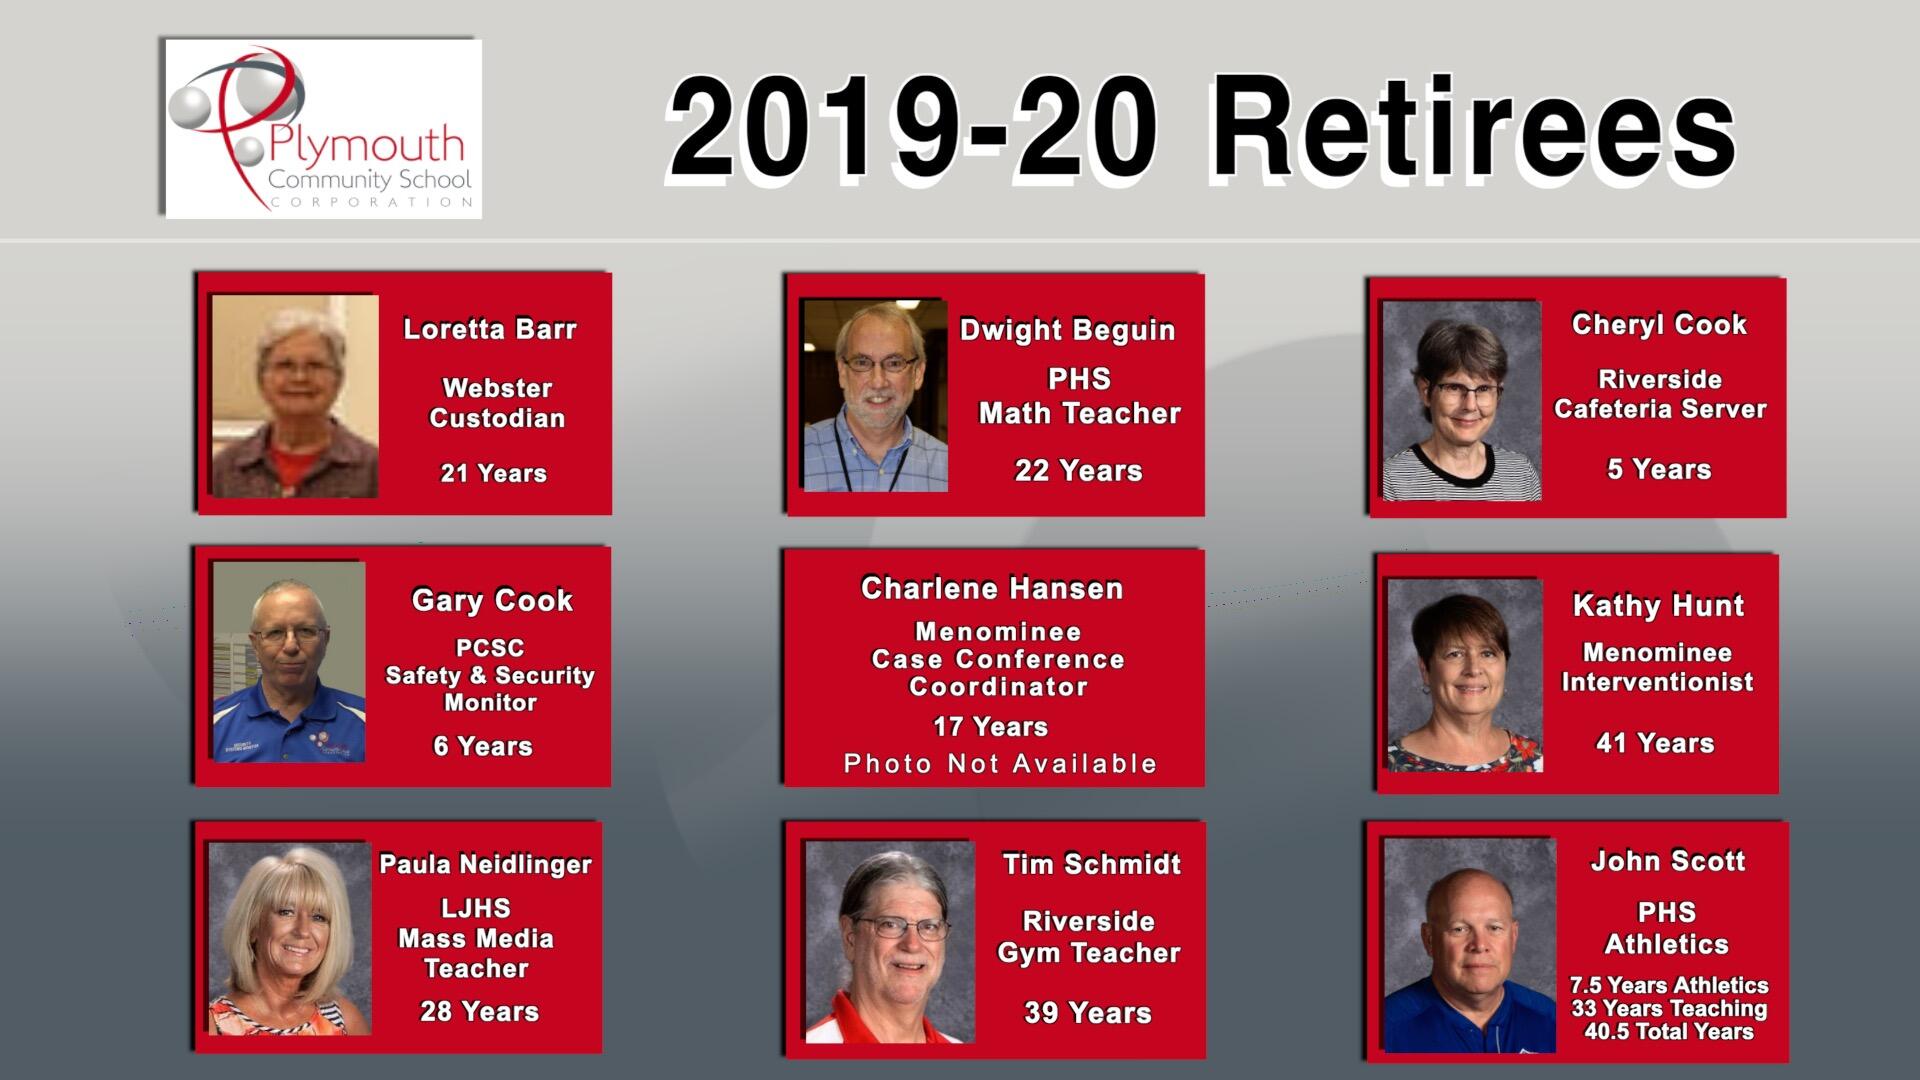 2019-20 Retirees Loretta Barr, Webster custodian 21 years, PHS Math Teacher Dwight Beguin 22 years, Cheryl Cook Riverside Cafeteria SErver 5 years, Gary Cook PCSC Safety & Security Monitor 6 years, Charlene Hansen Menominee Case Conference Coordinator 17 years photo not available, Kathy Hunt Menominee Interventionist 41 years, Paula Neidlinger LJHS Mass Media Teacher 28 years, Tim Schmidt Riverside Gym Teacher 39 years, John Scott PHS Athletics 7.5 athletics 33 years teaching 40.5 total years with photos of retirees